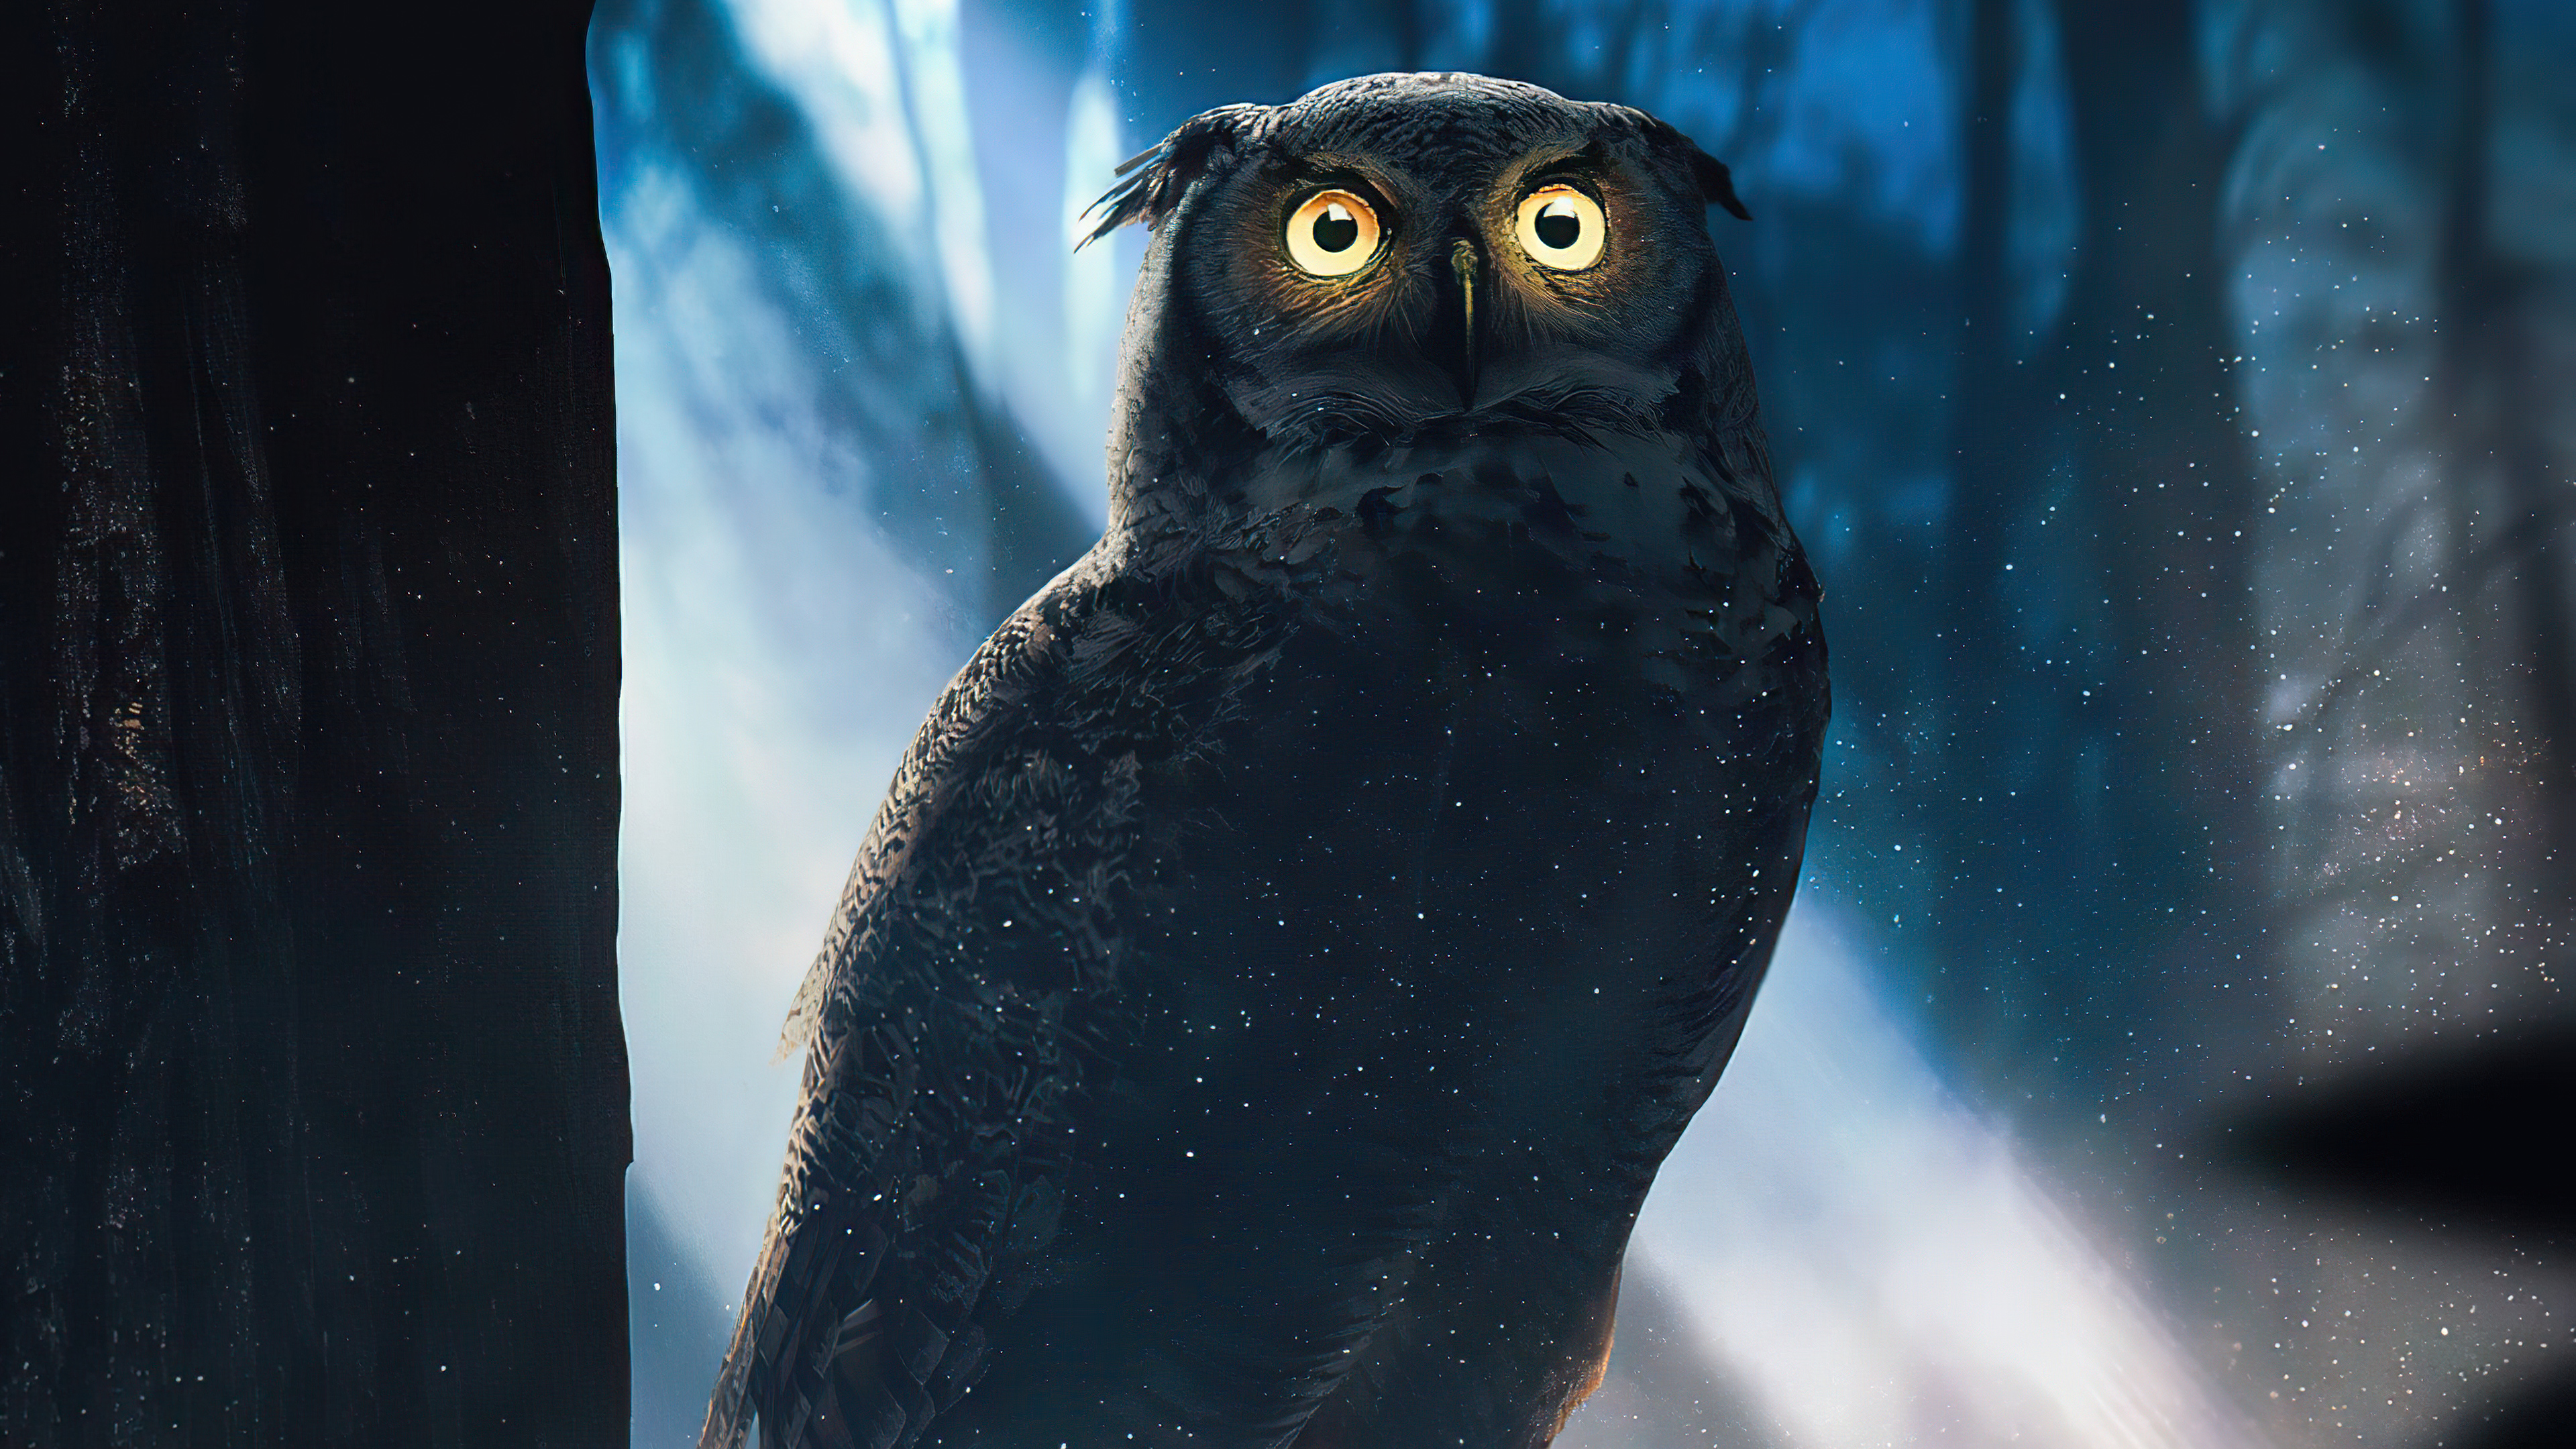 Rendering of an owl with glowing eyes in a night forest